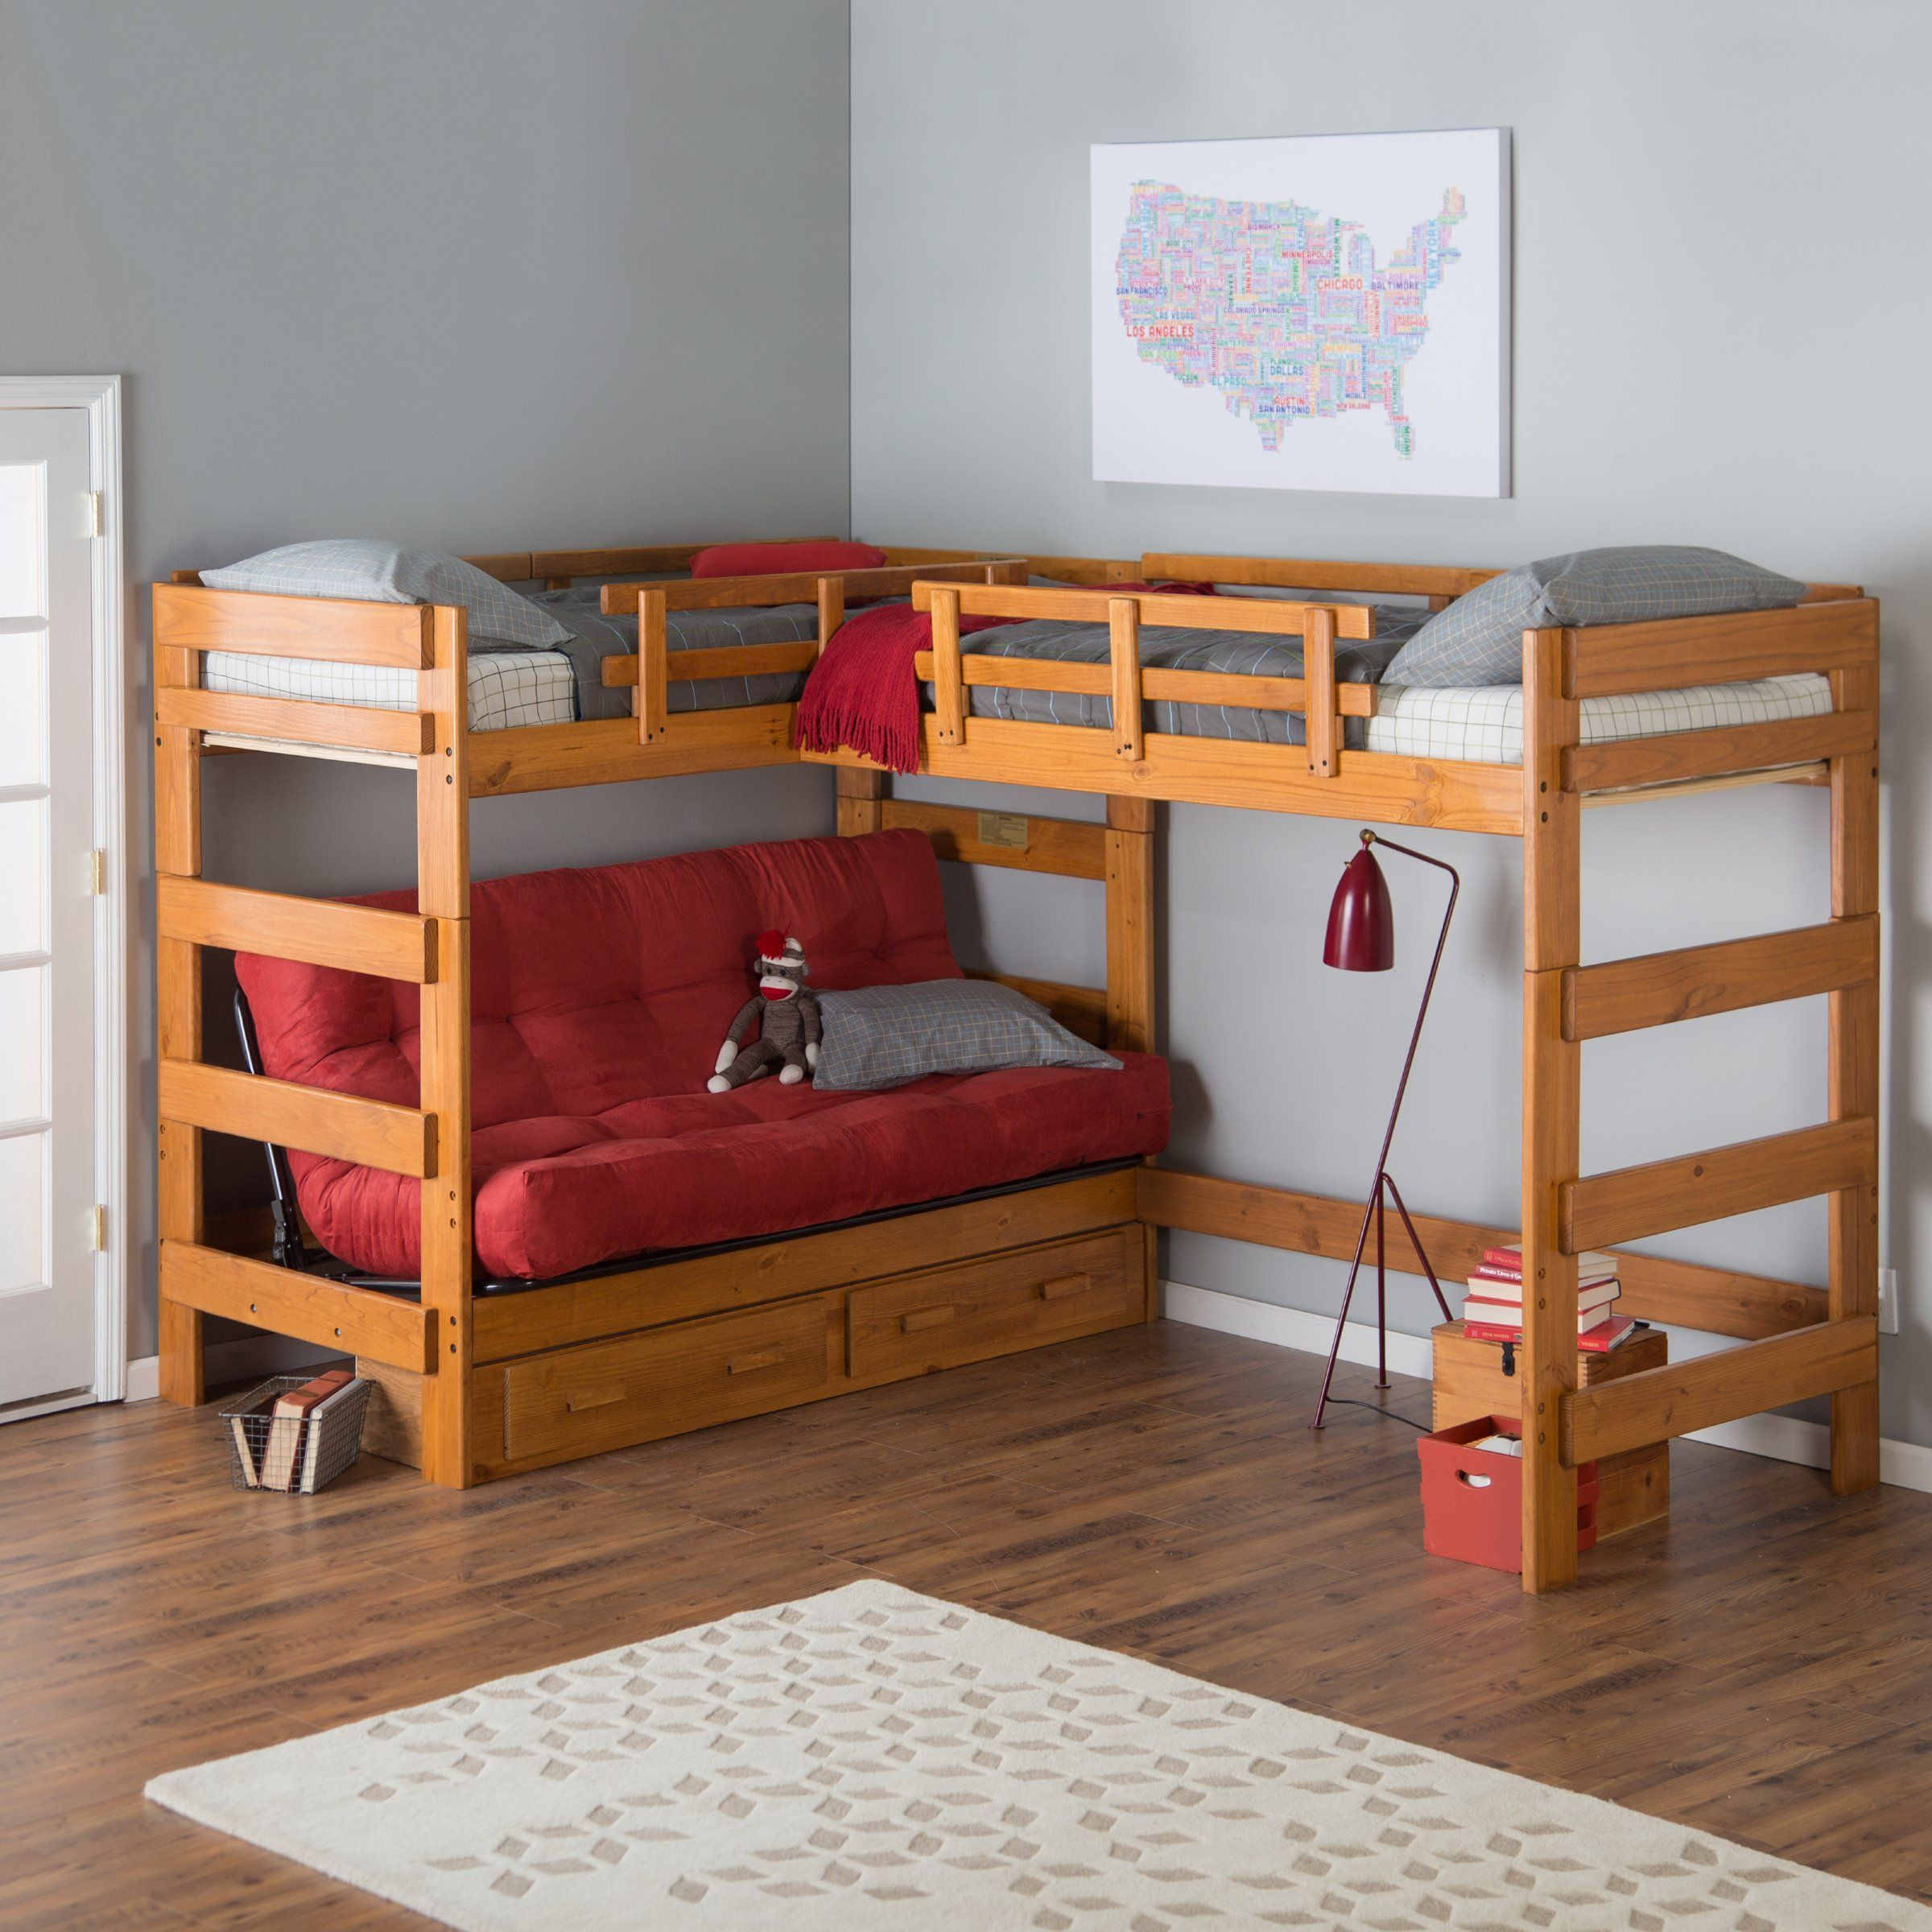 Futons For Kids Room
 Woodcrest Heartland Futon Bunk Bed with Extra Loft Bed